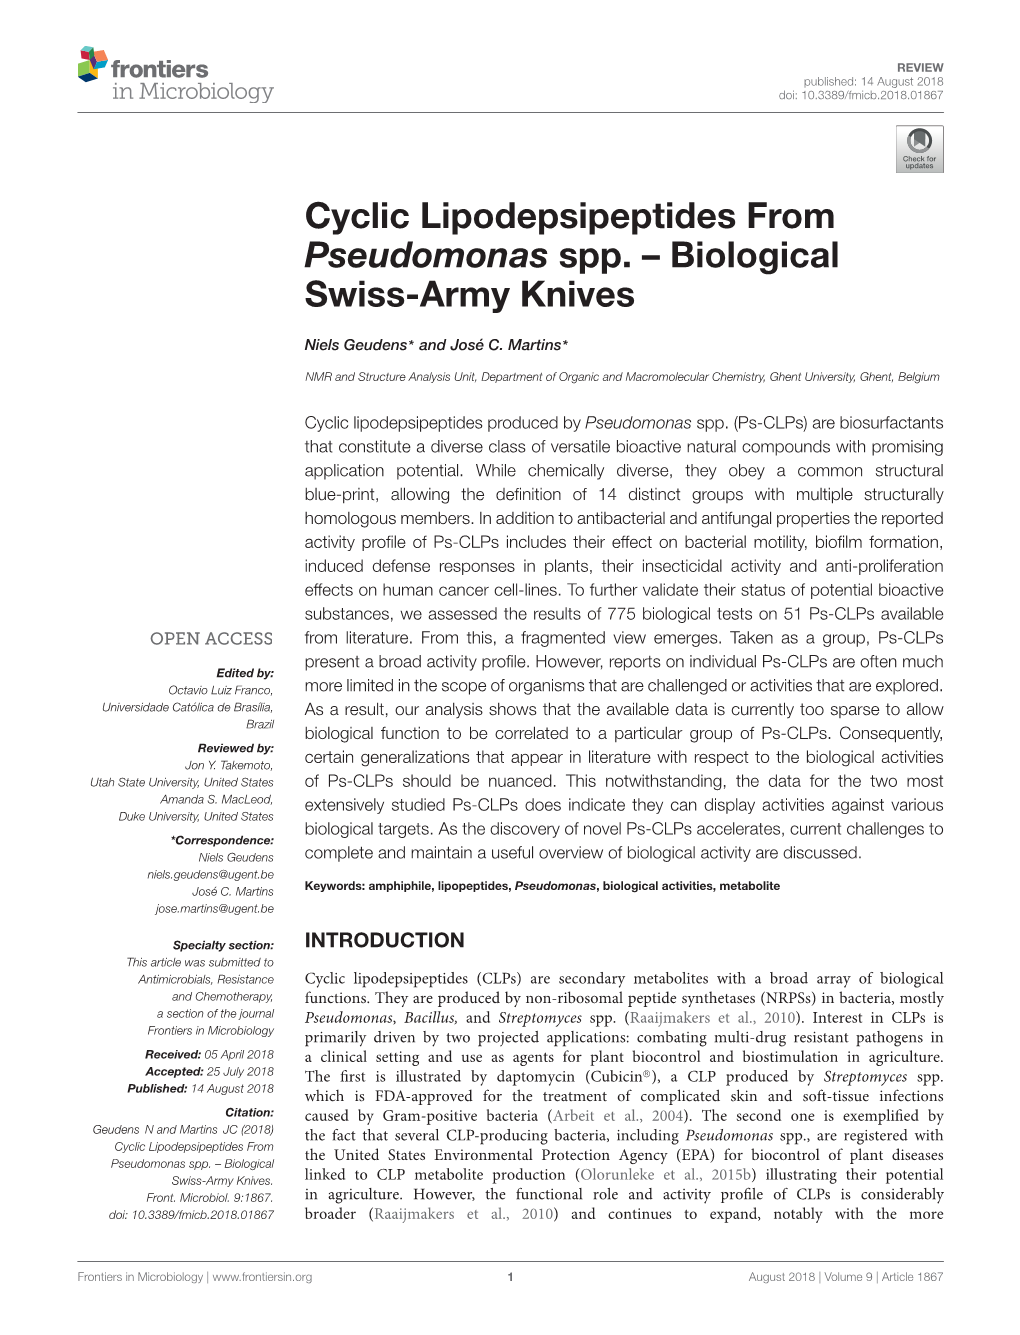 Cyclic Lipodepsipeptides from Pseudomonas Spp. – Biological Swiss-Army Knives